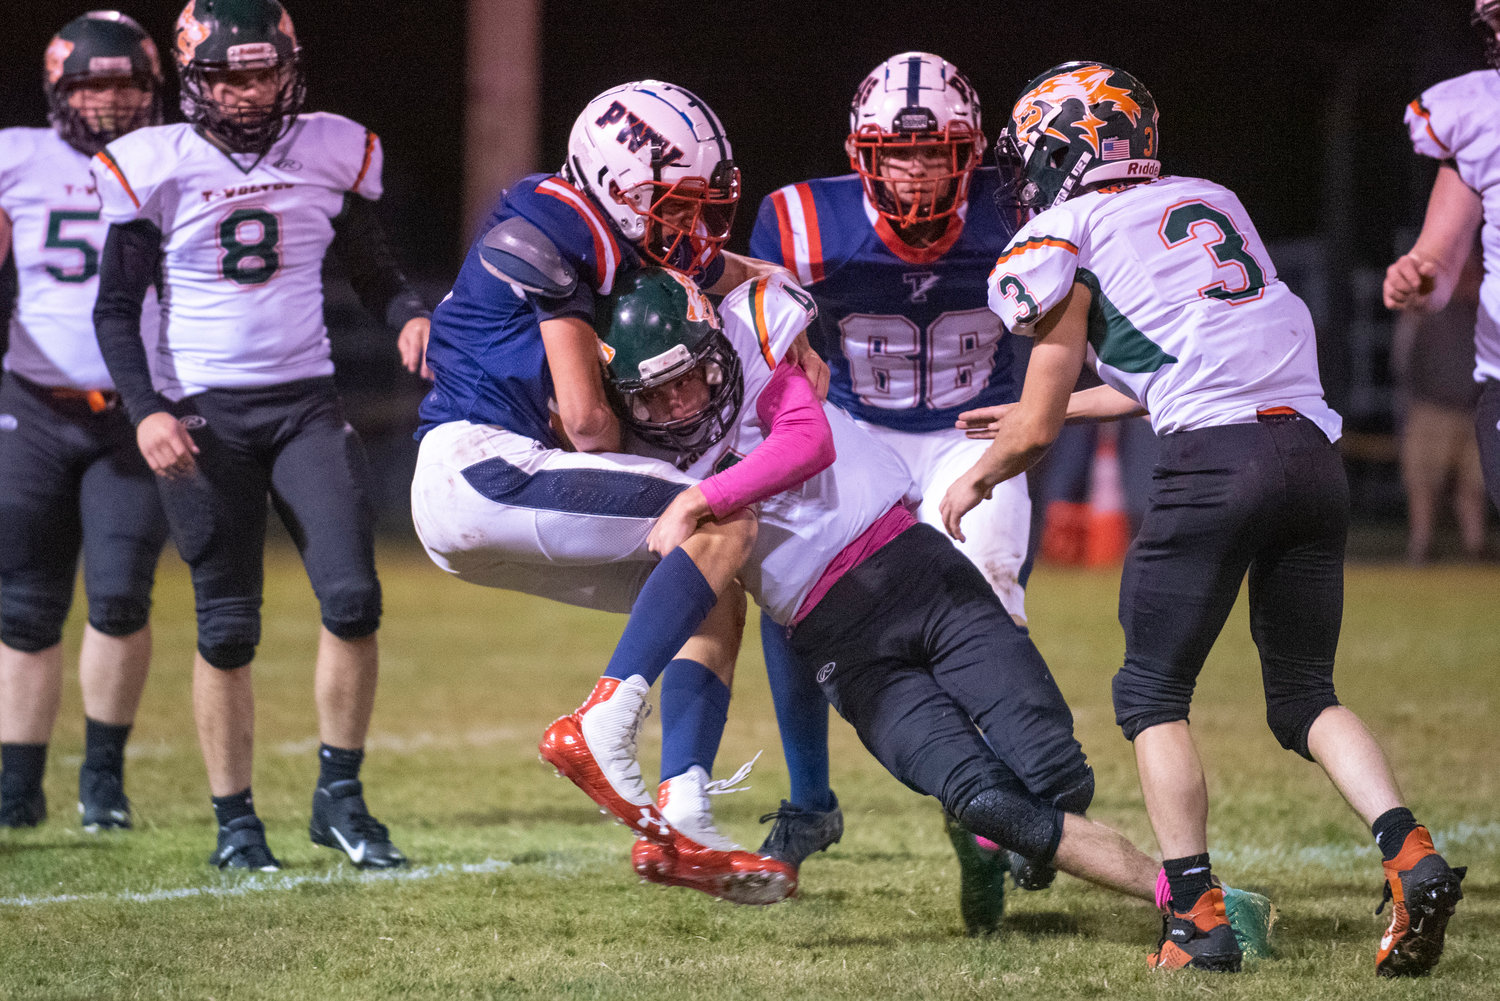 MWP's Layten Collette (4) makes a tackle on PWV's Wil Clements (5) on Oct. 1, 2021.